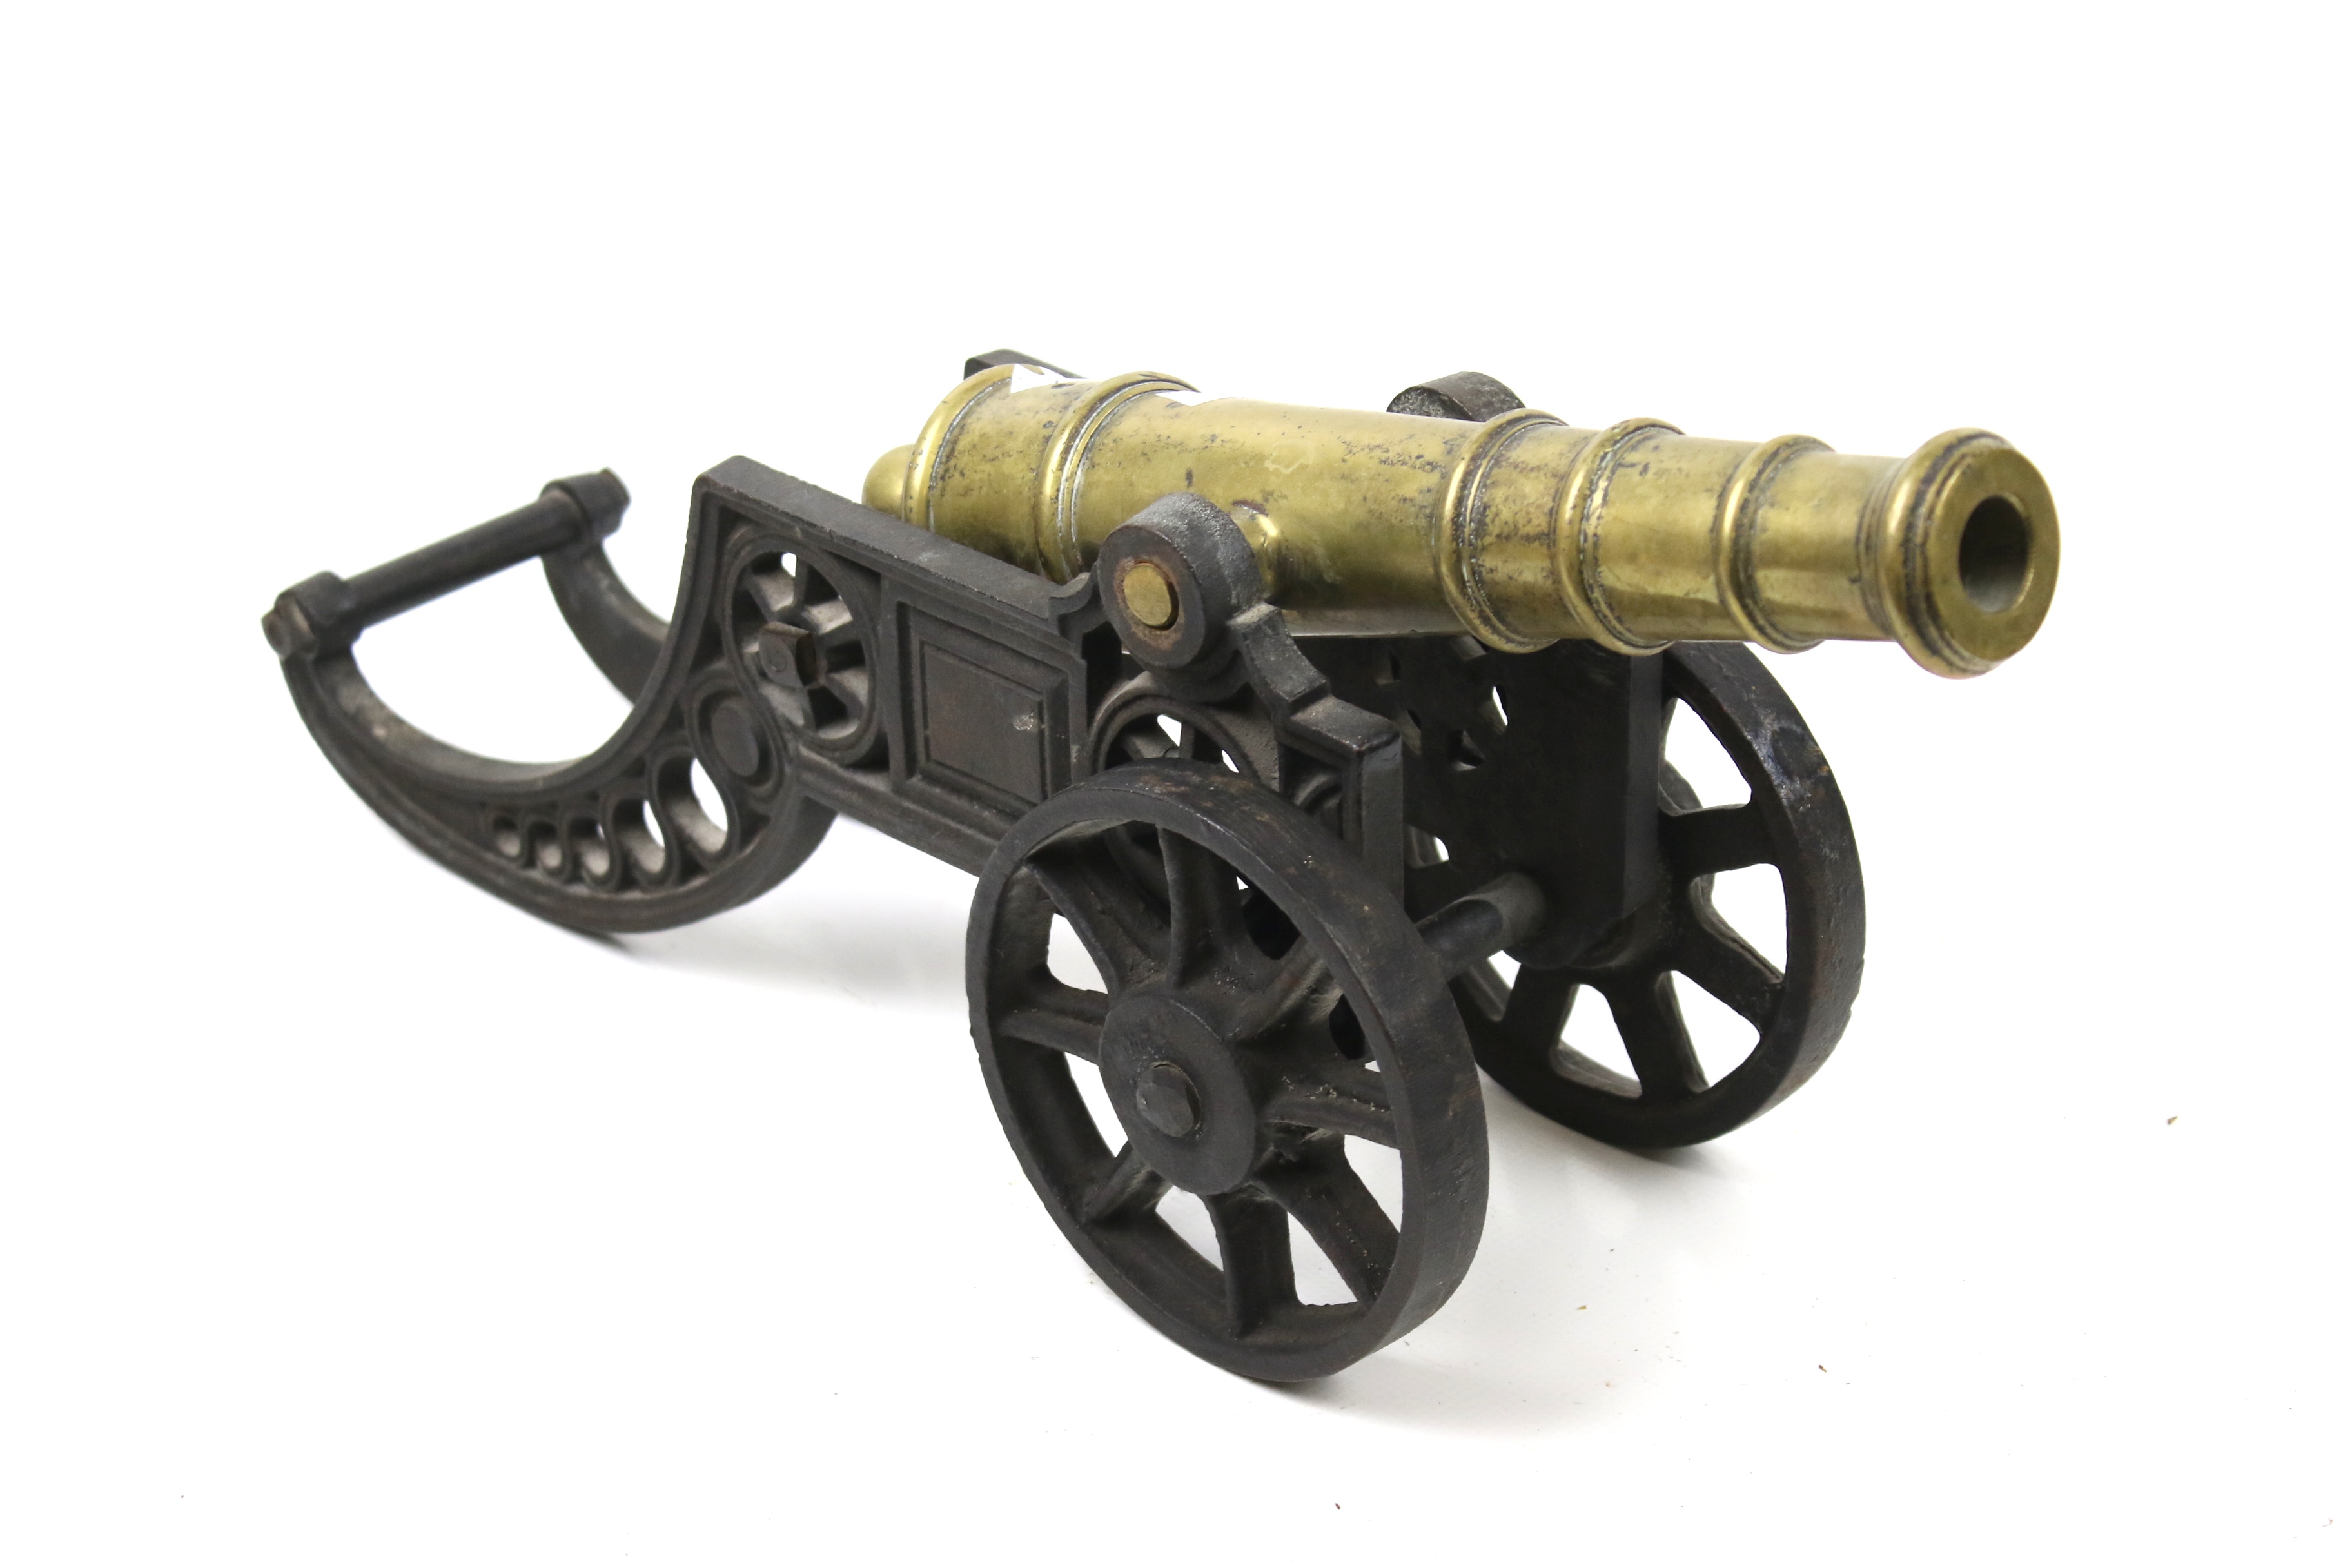 A brass replica of a canon. Mounted on a metal carriage.